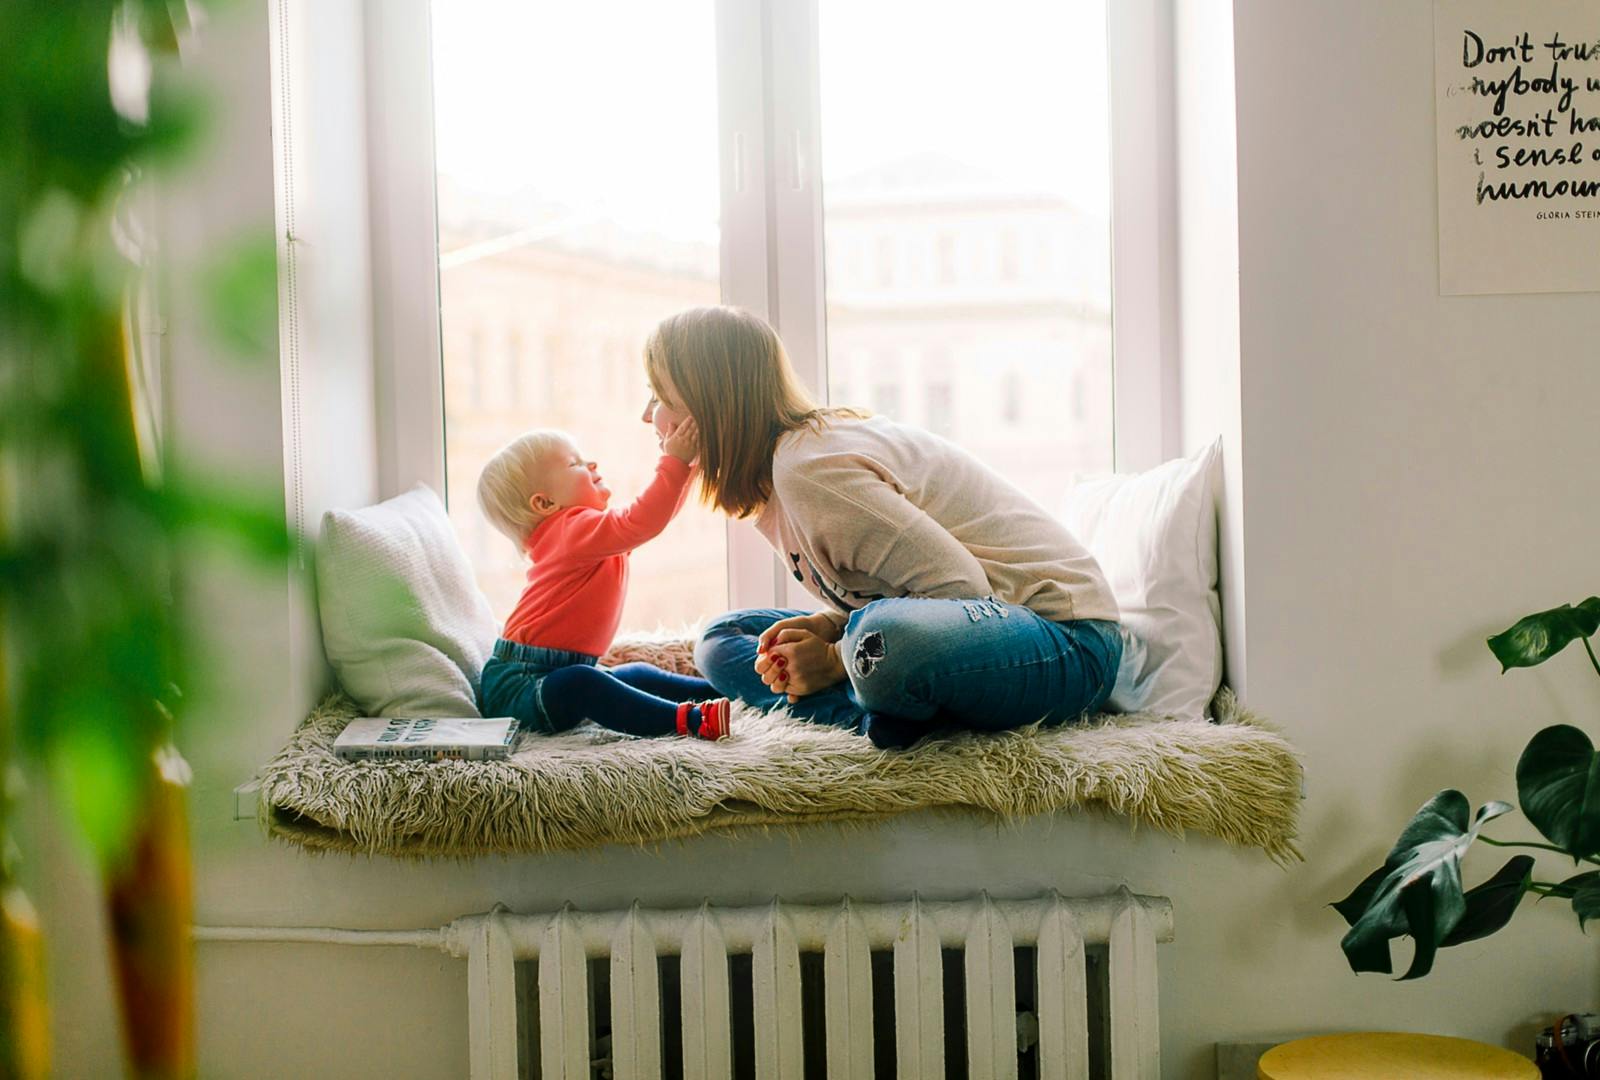 4 facts about indoor air pollution